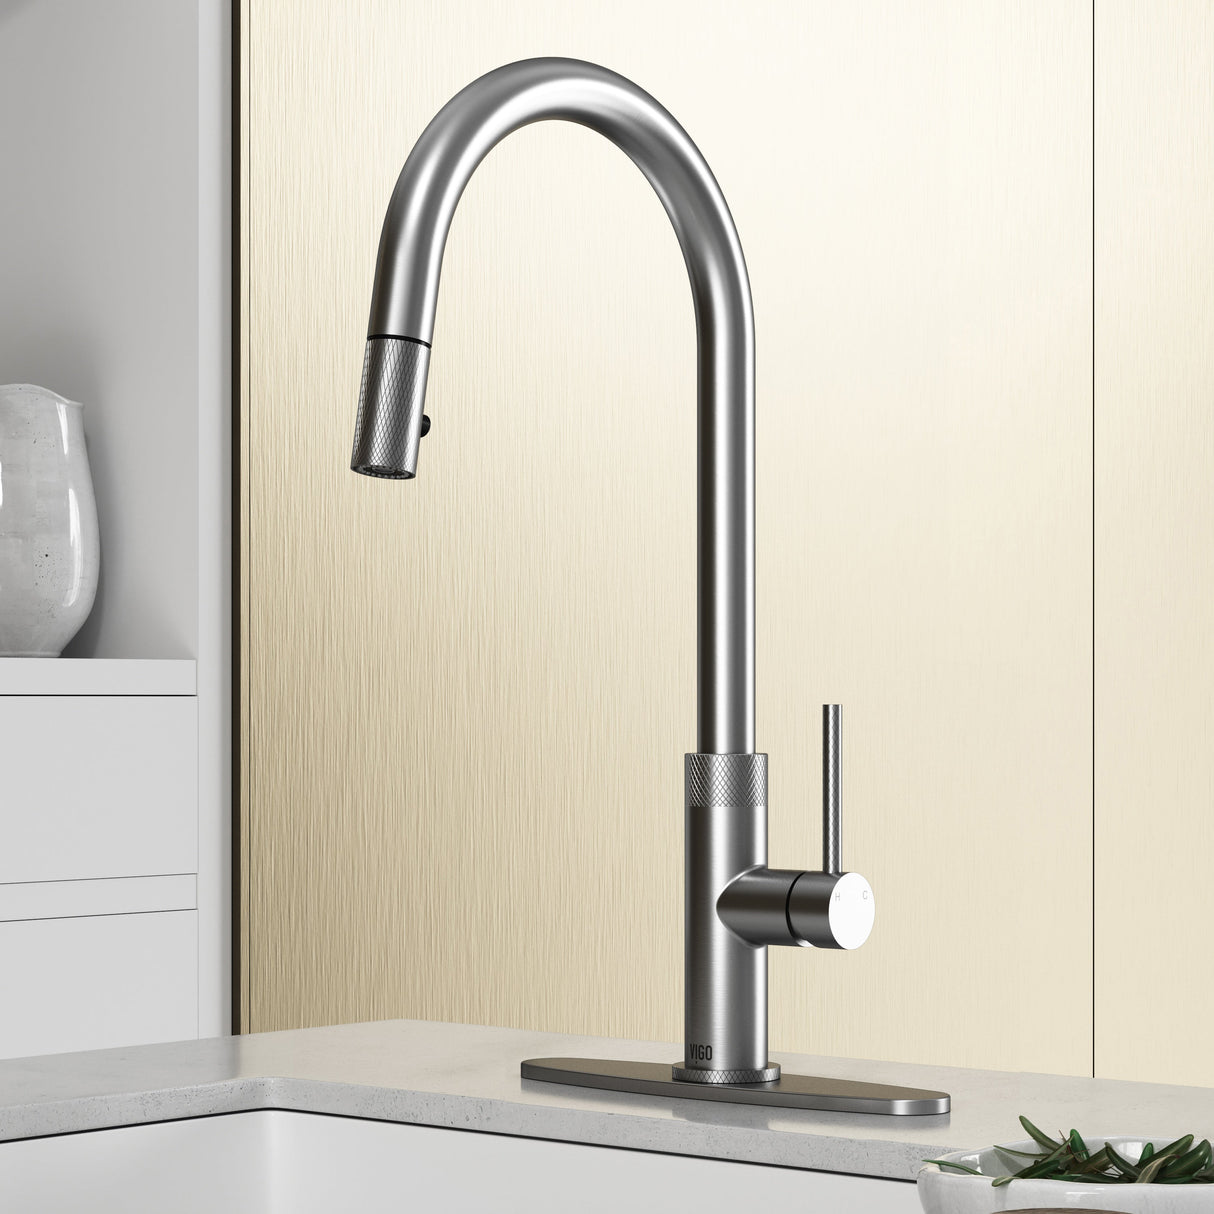 VIGO Bristol Pull-Down Kitchen Faucet with Deck Plate in Stainless Steel VG02033STK1